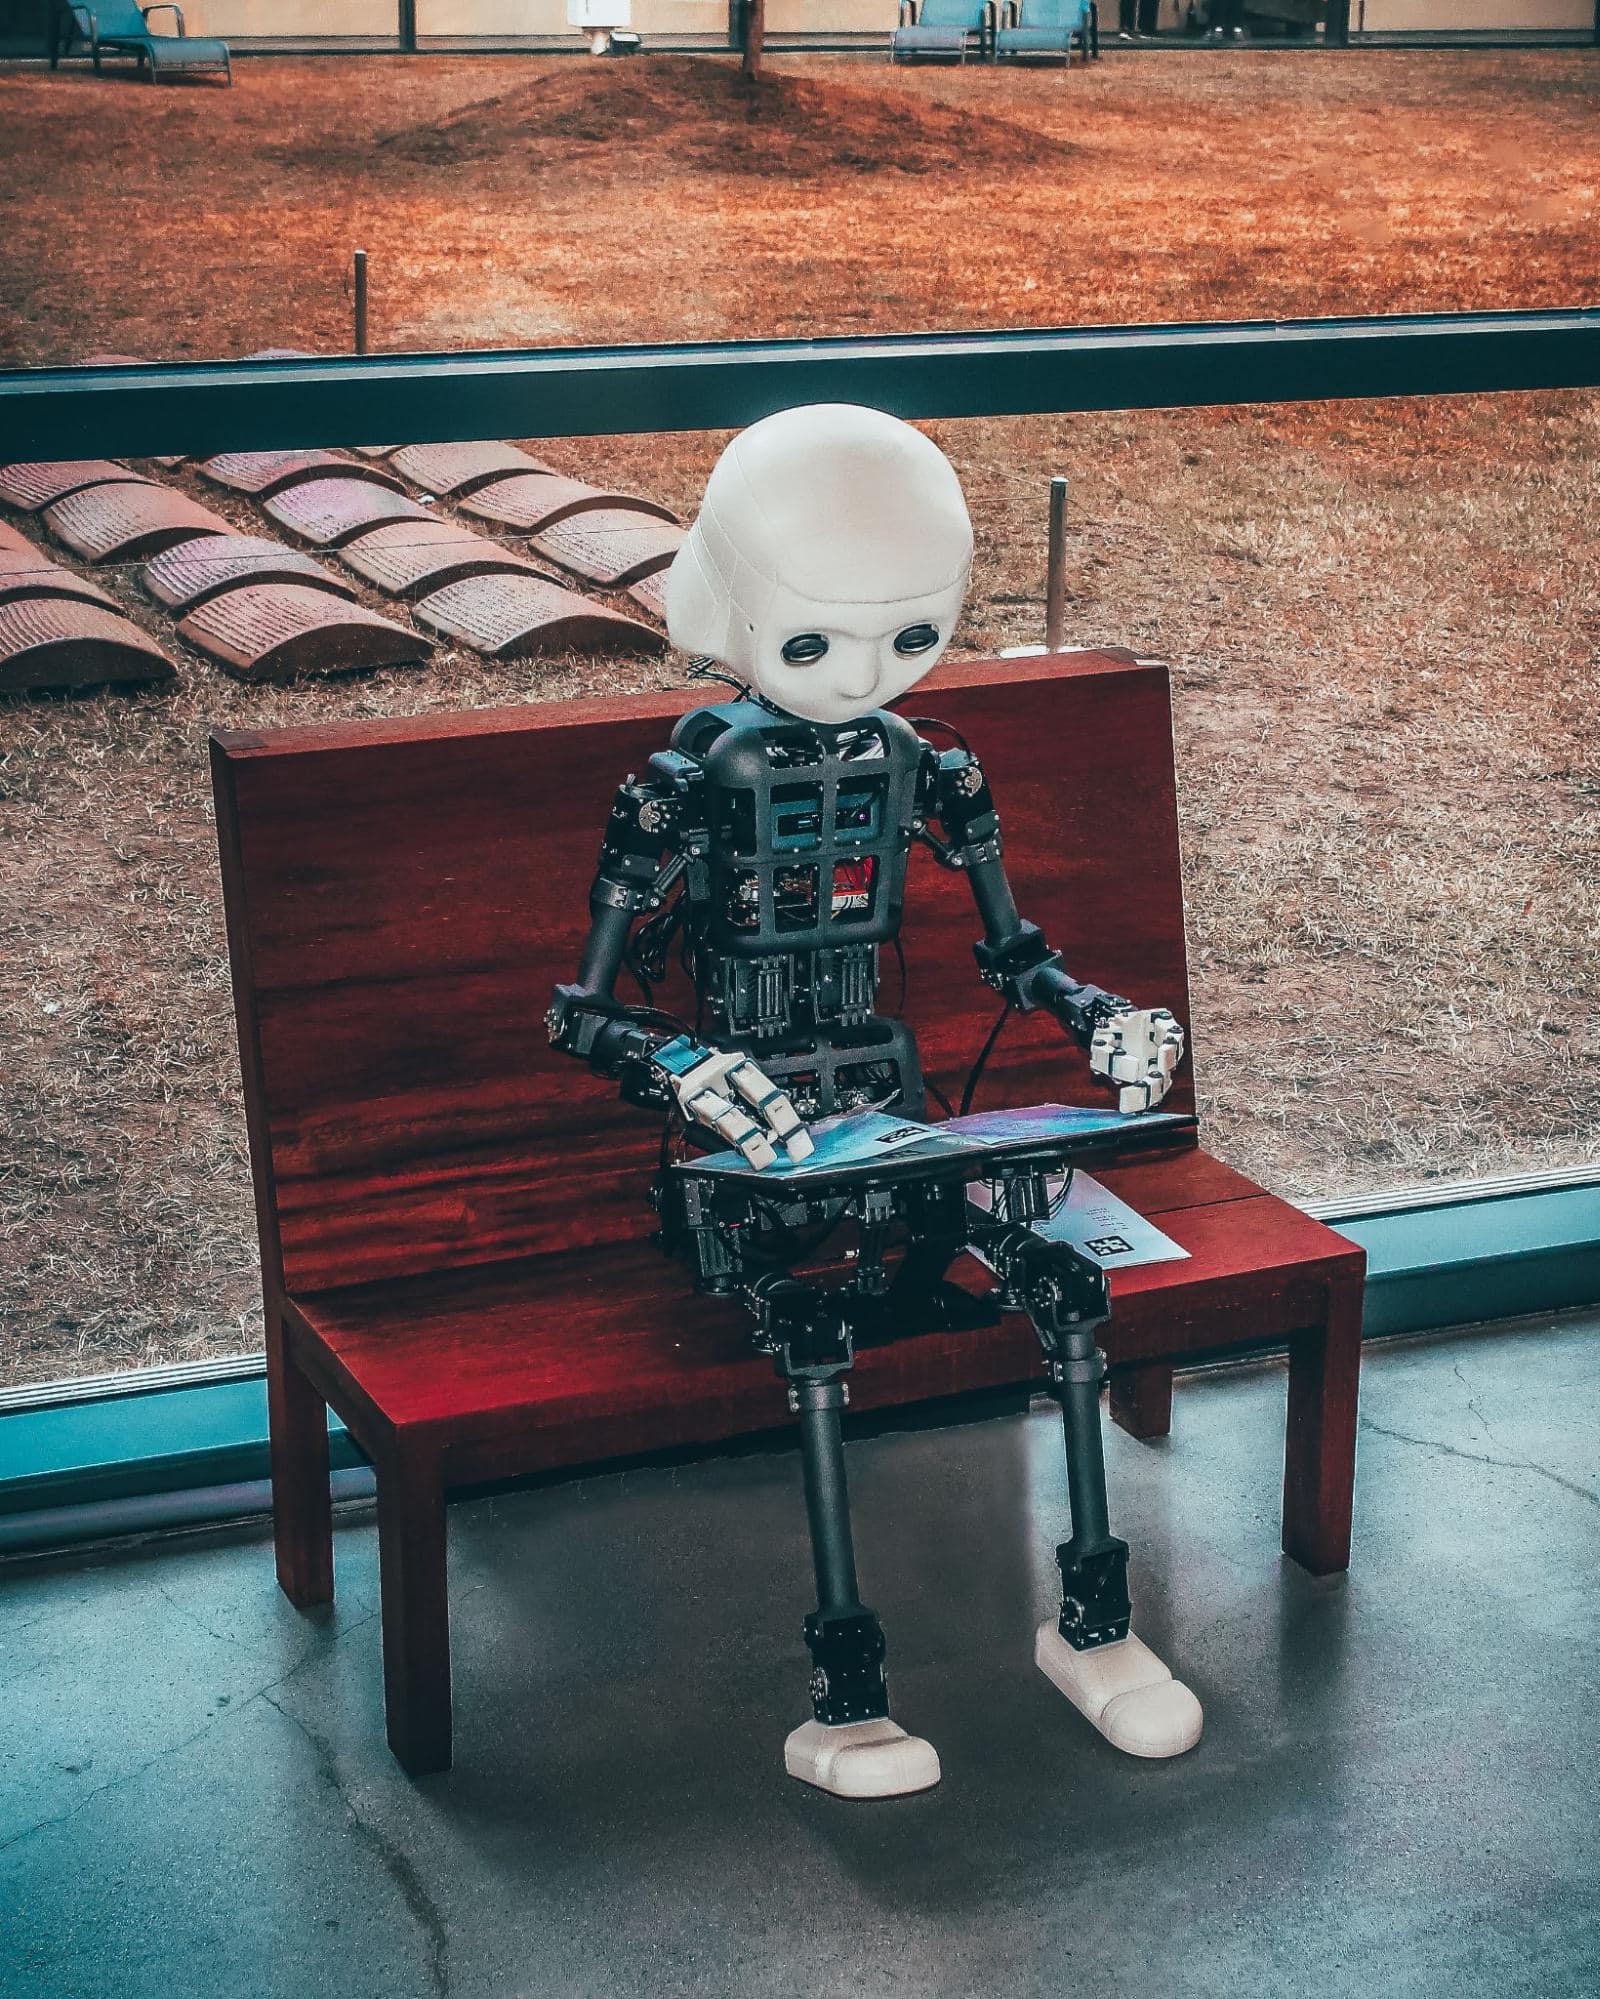 Solemn-looking robot sitting on a bench while holding a laptop